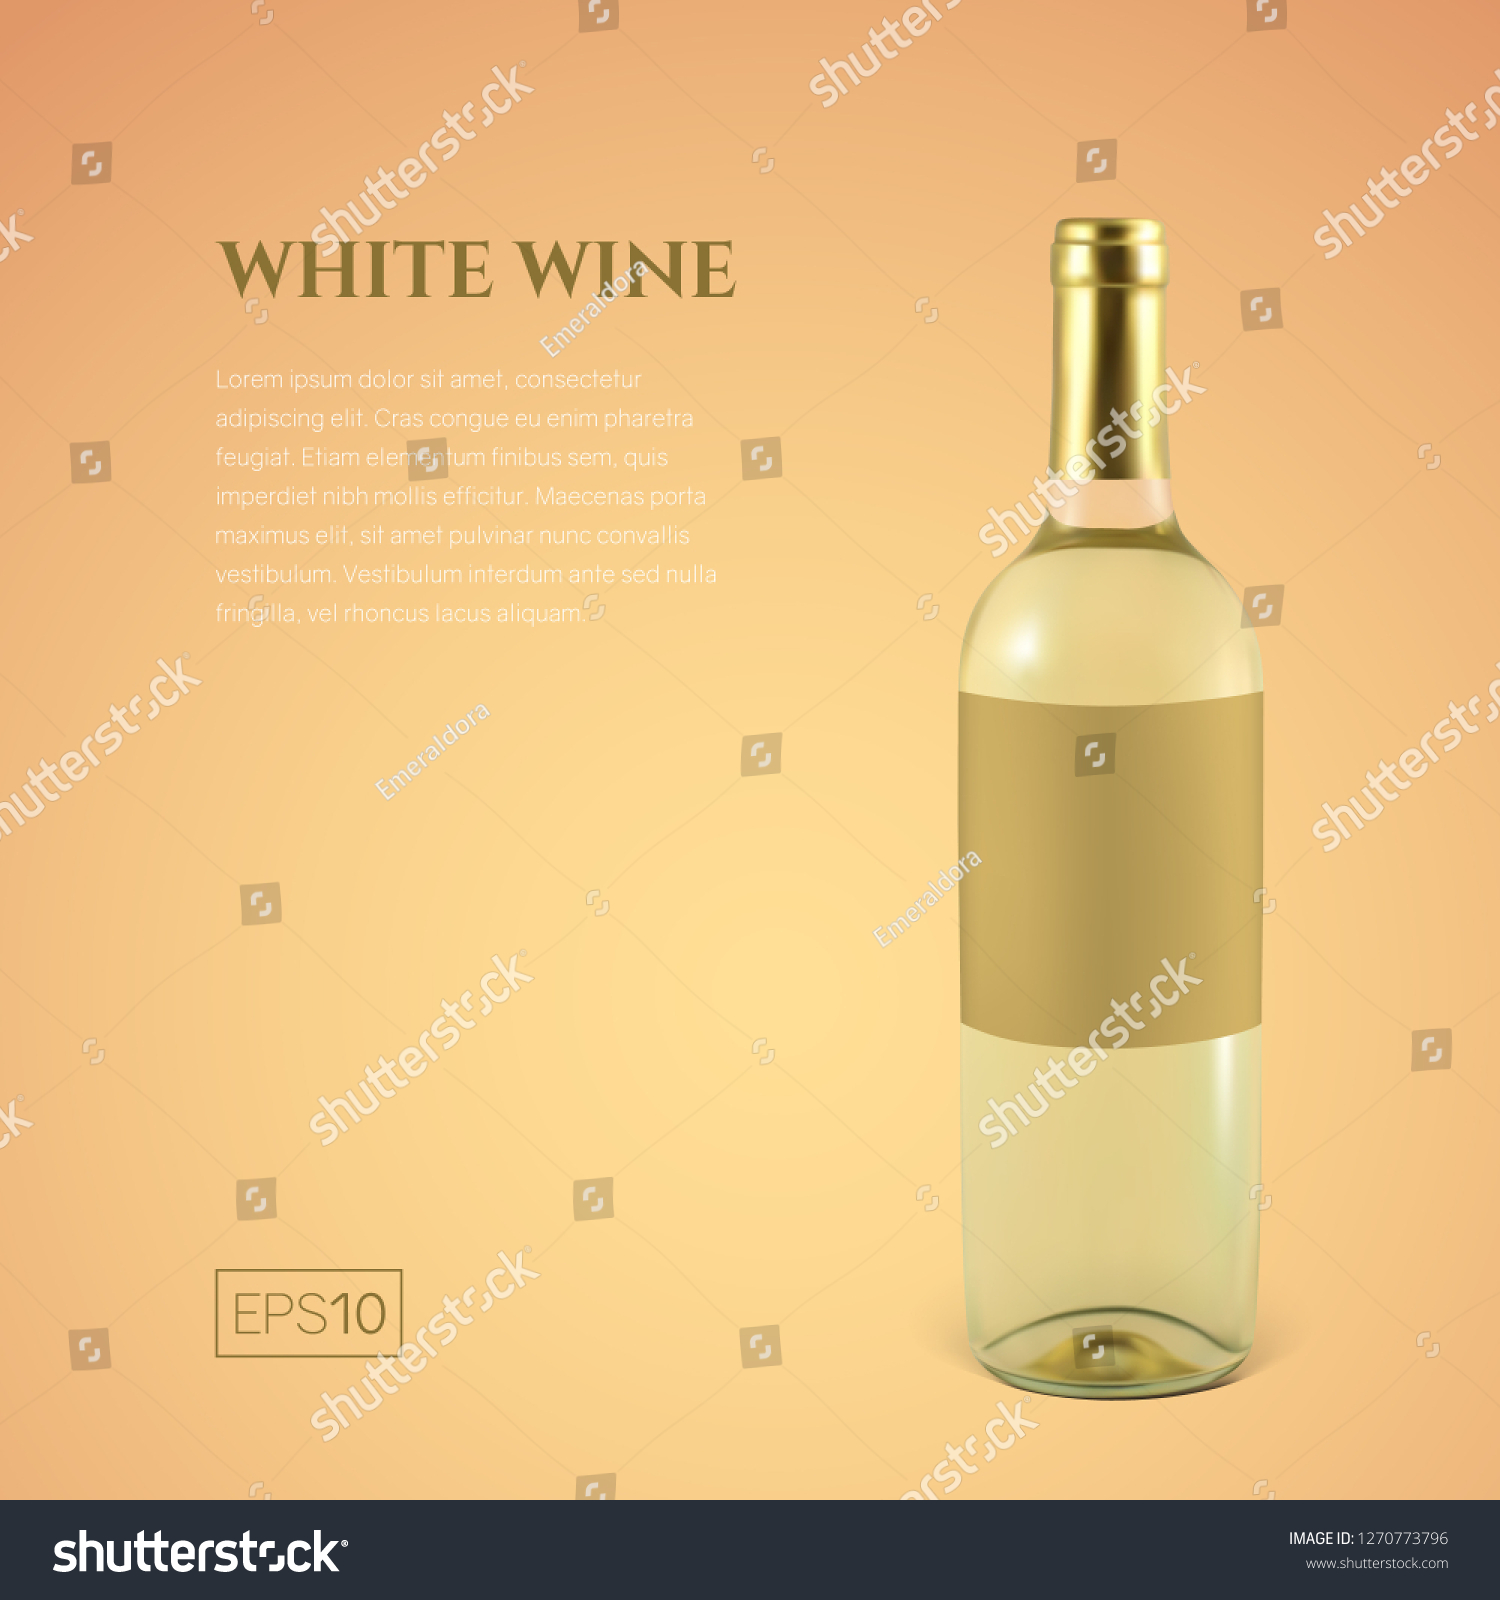 Download Photorealistic Bottle White Wine On Yellow Stock Vector Royalty Free 1270773796 PSD Mockup Templates